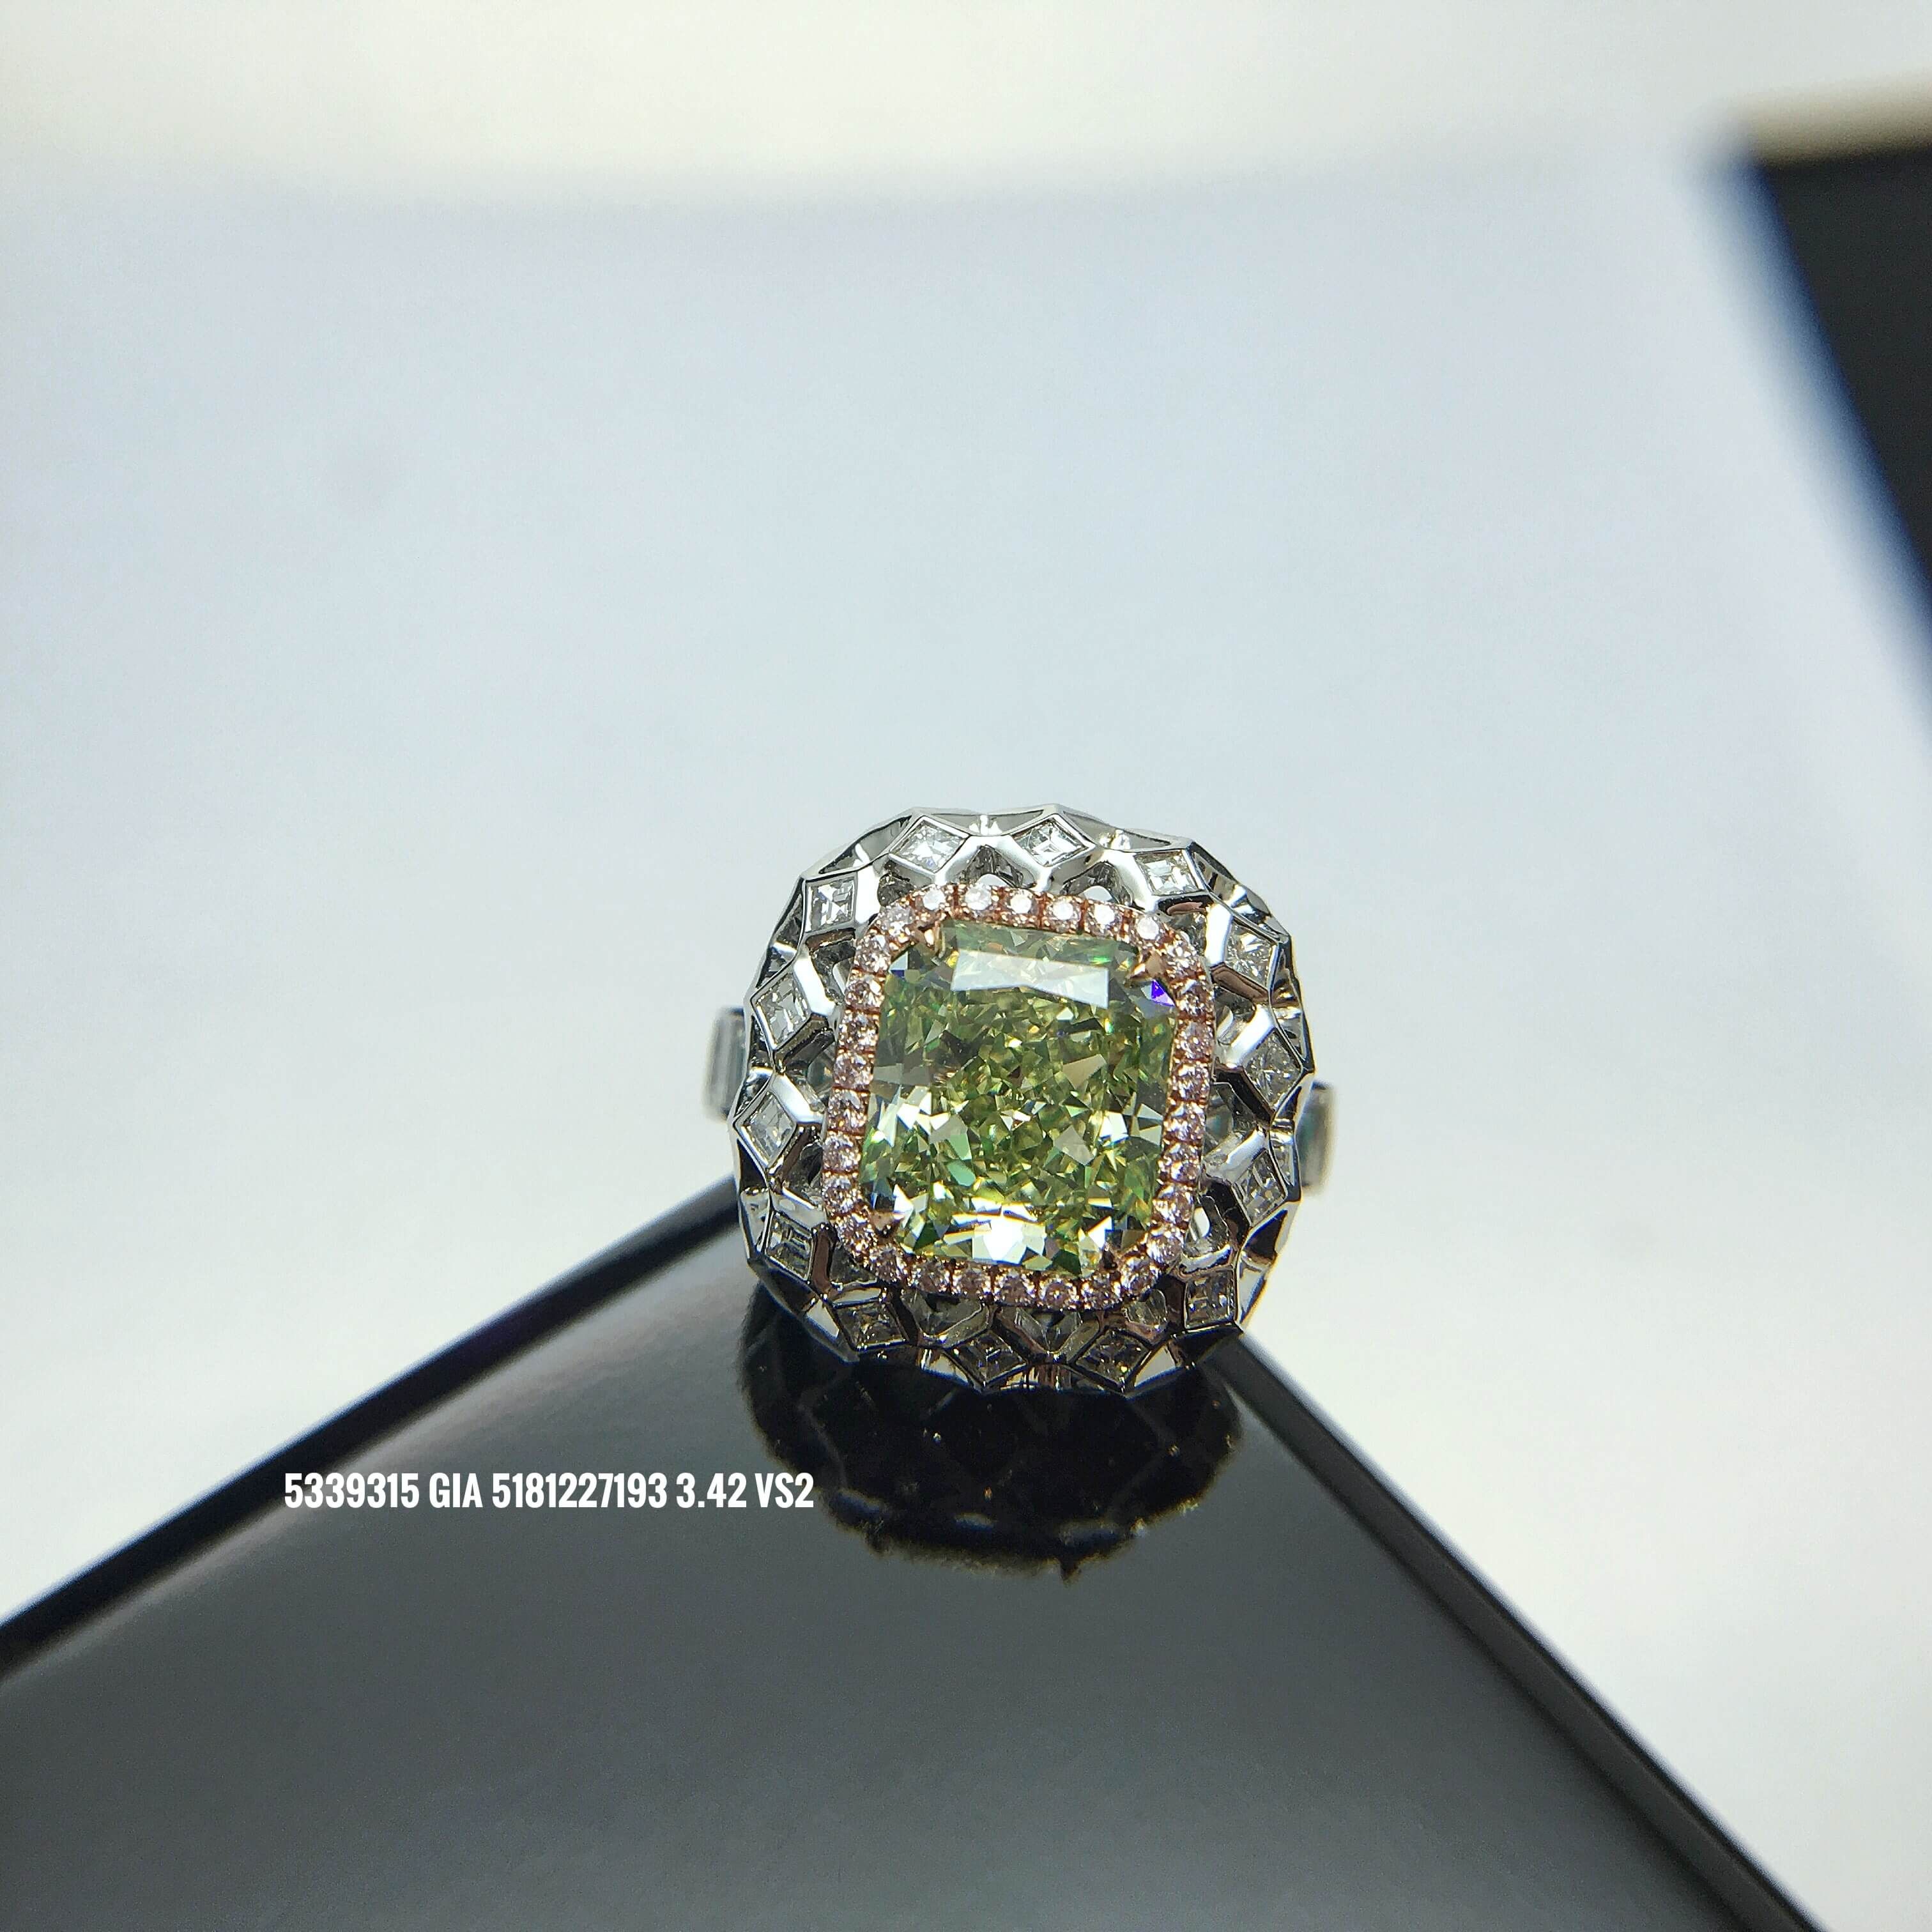 Fancy Green Yellow Diamond Ring, 3.42 Ct. (4.76 Ct. TW), Radiant shape, GIA Certified, 5181227193